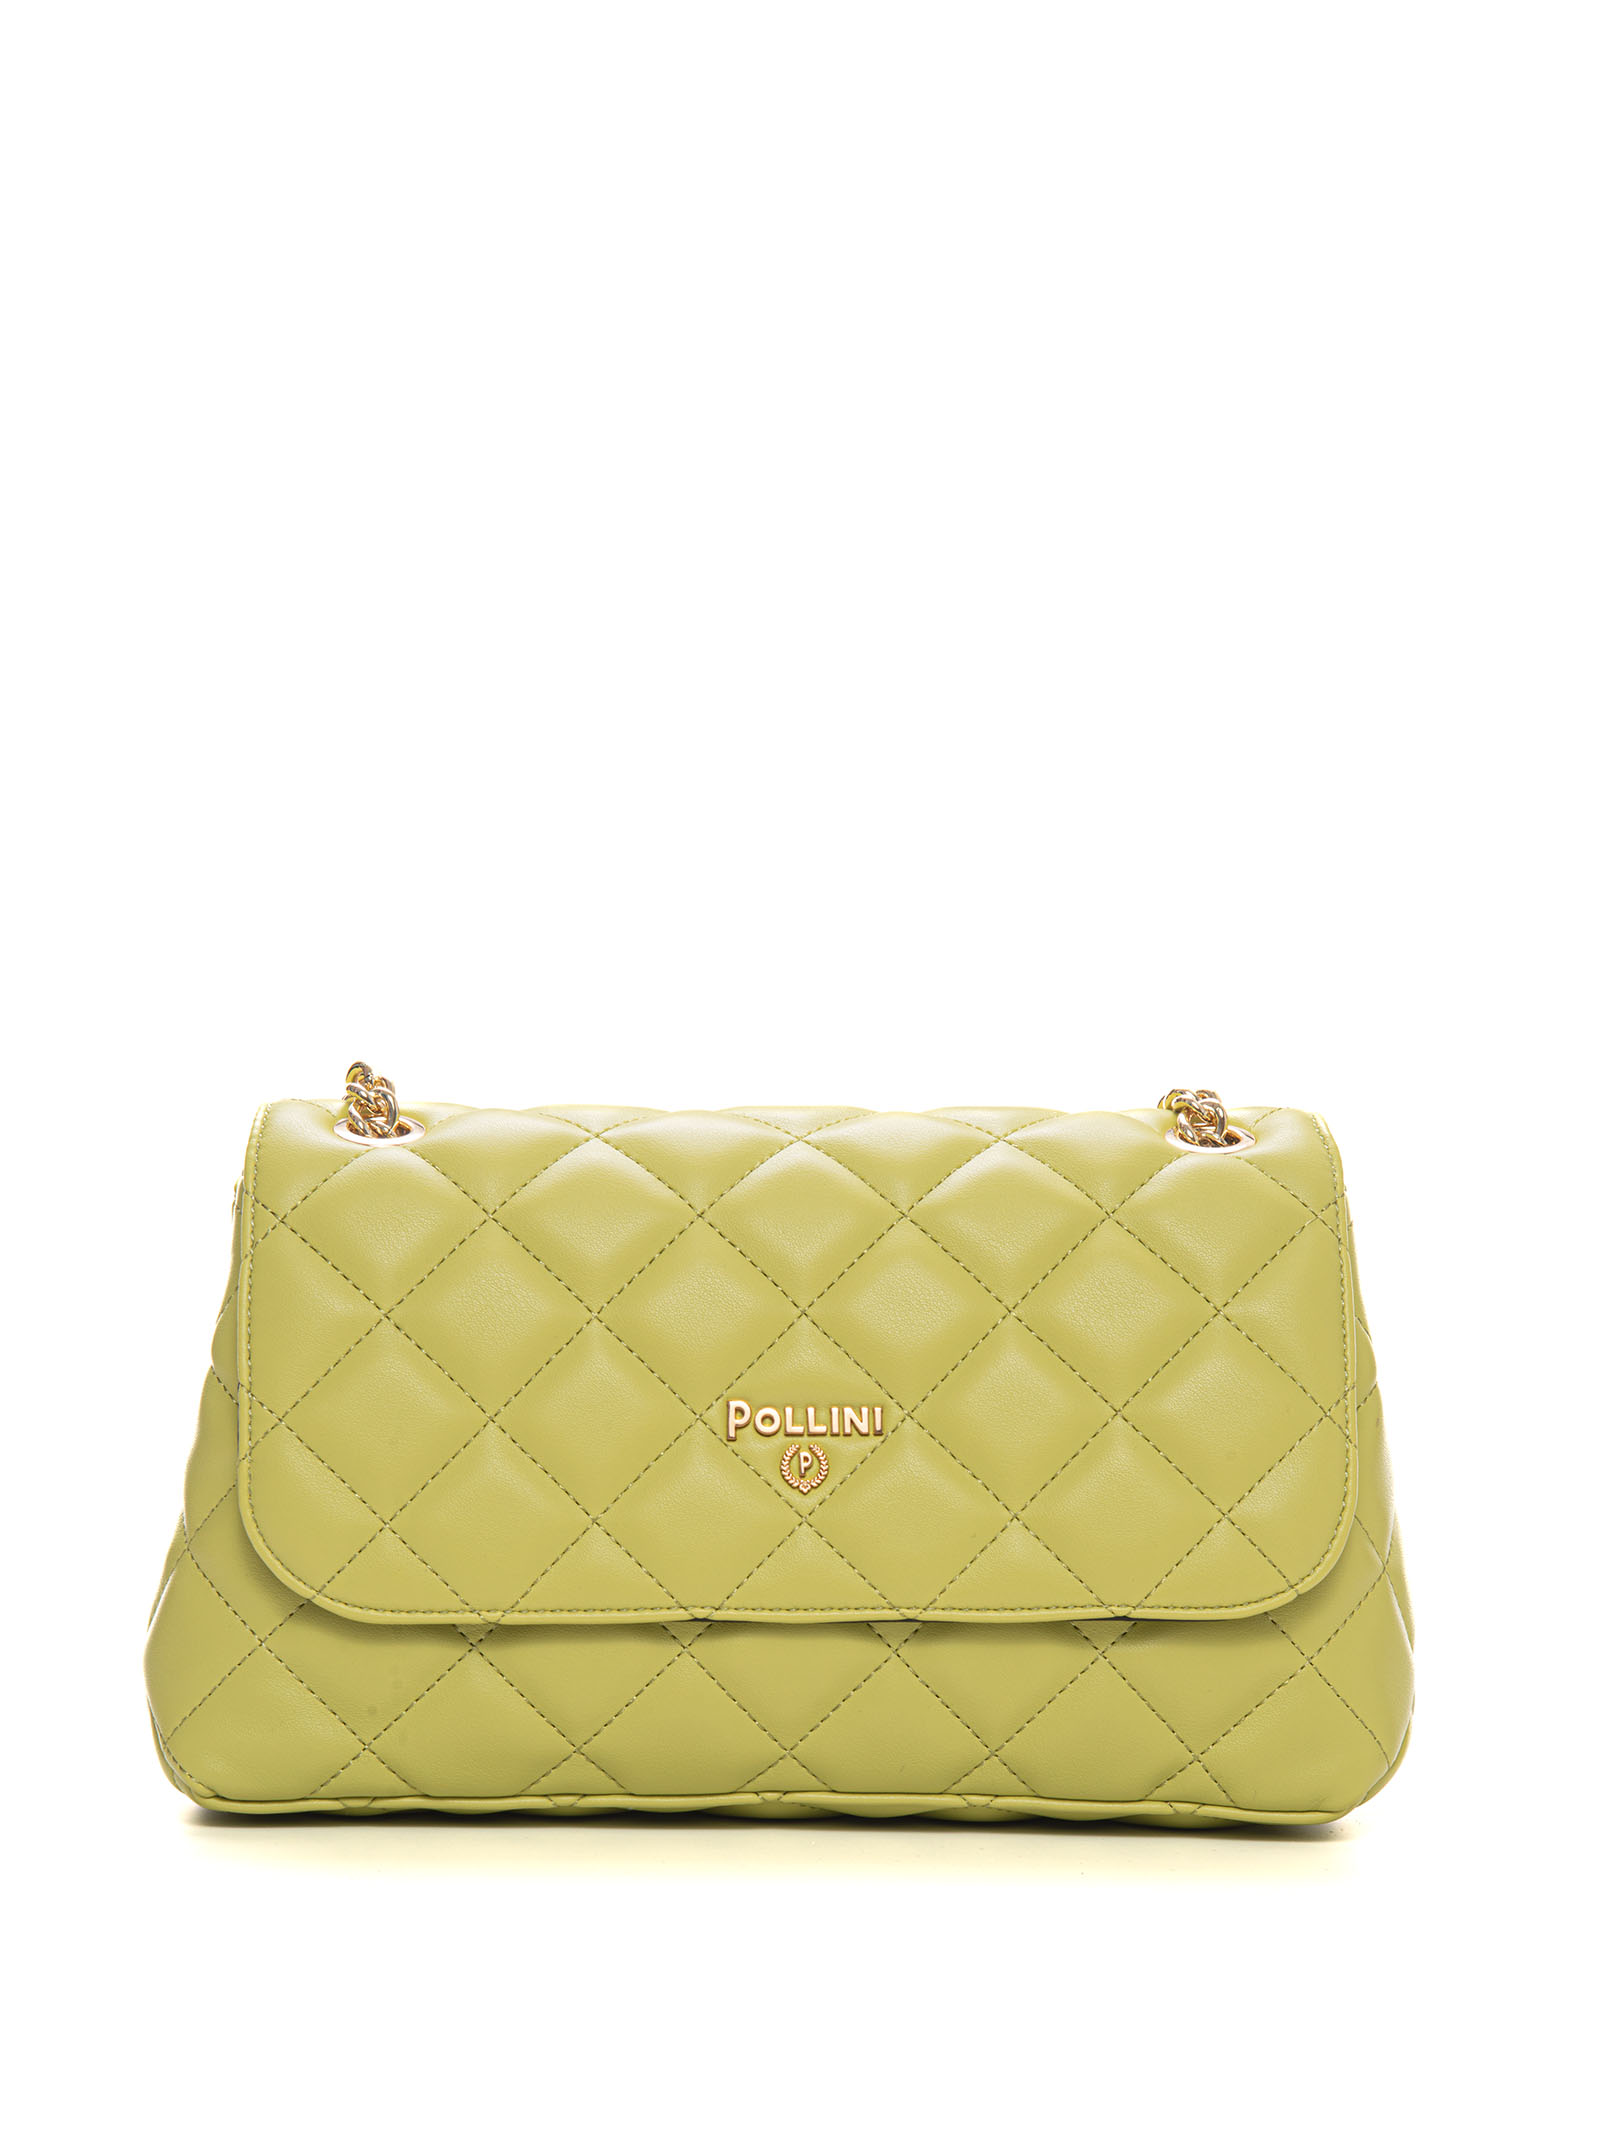 Pollini Grande Chanel Chanel Style Bag In Lime